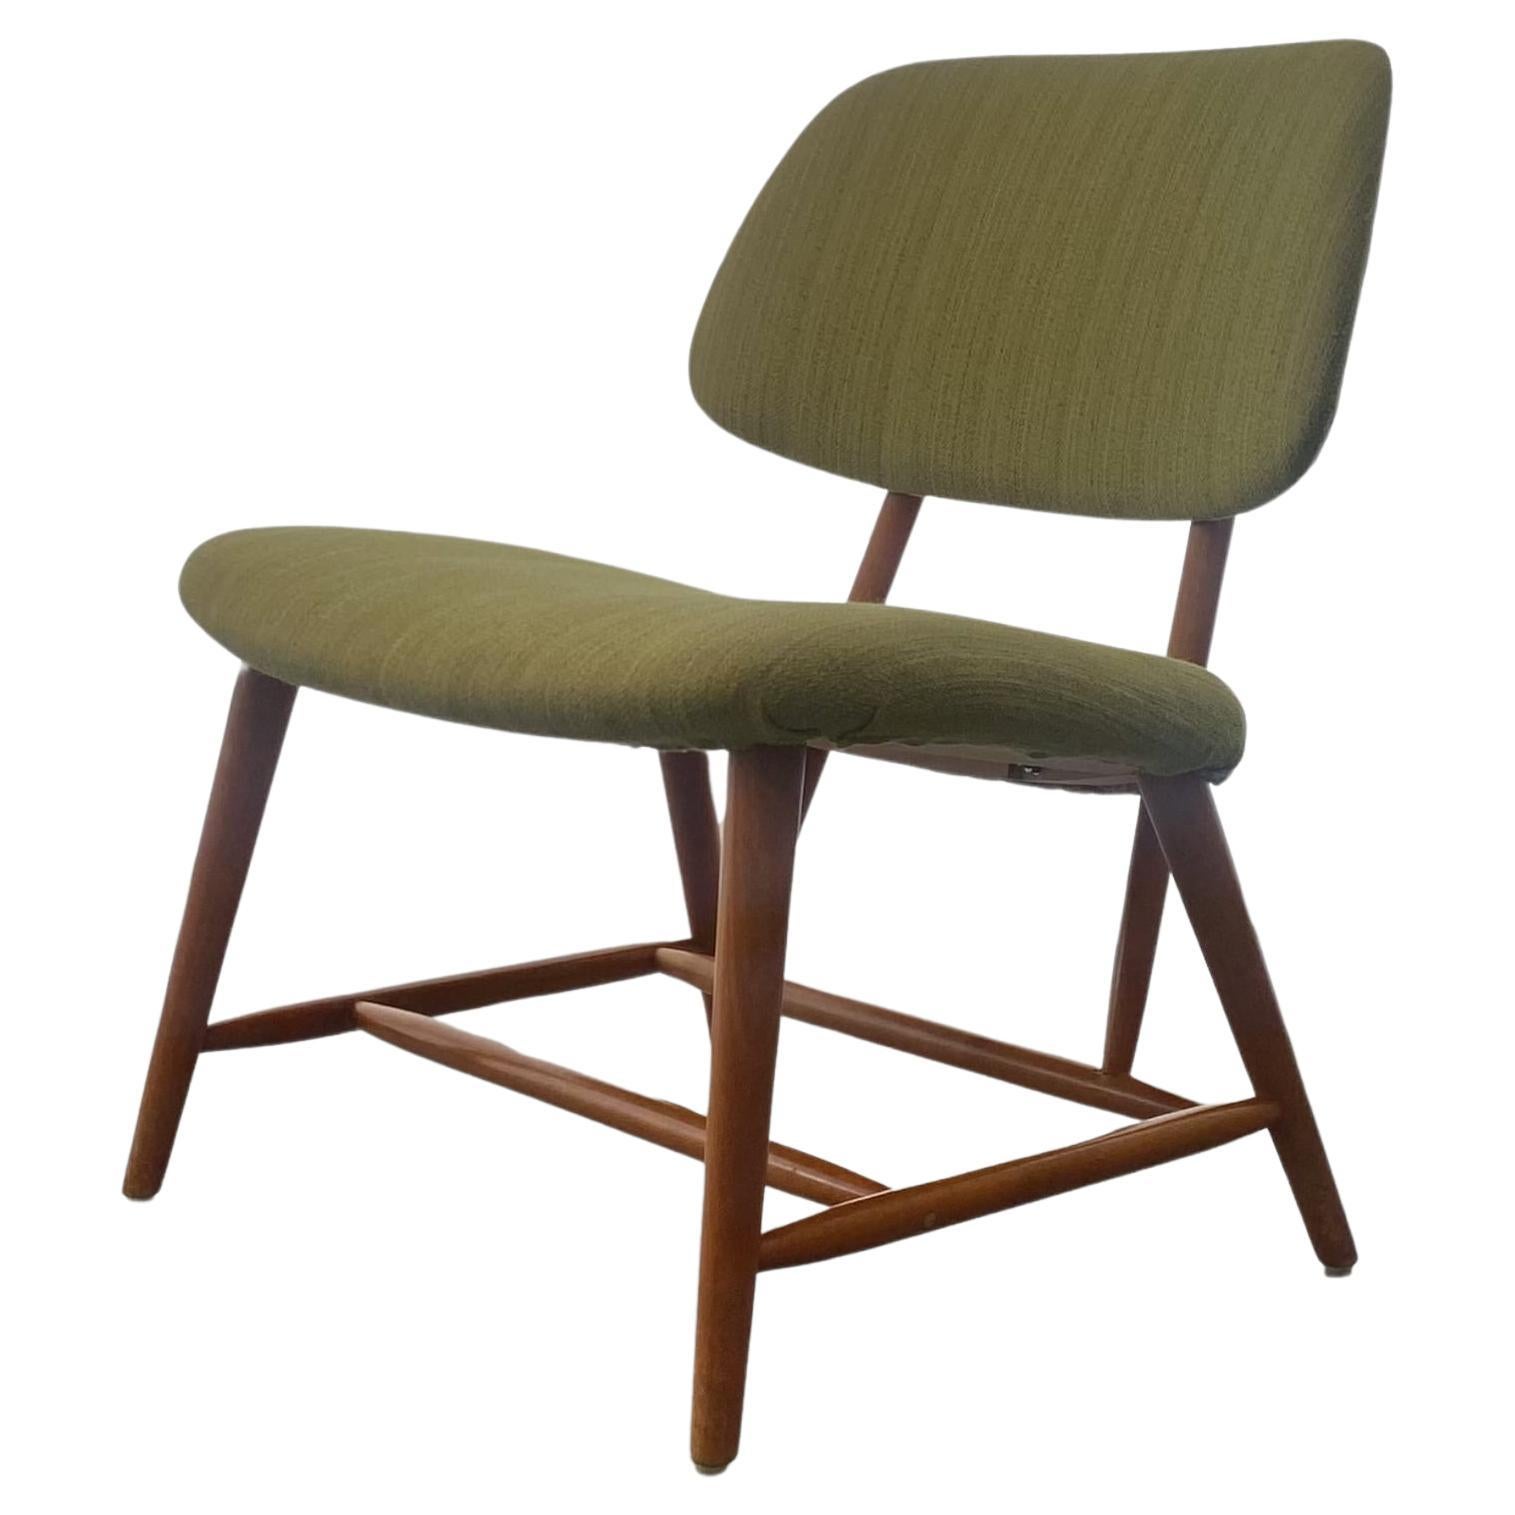 Swedish TeVe chair by Alf Svensson for Ljungs Industrier, Dux, 1950s For Sale